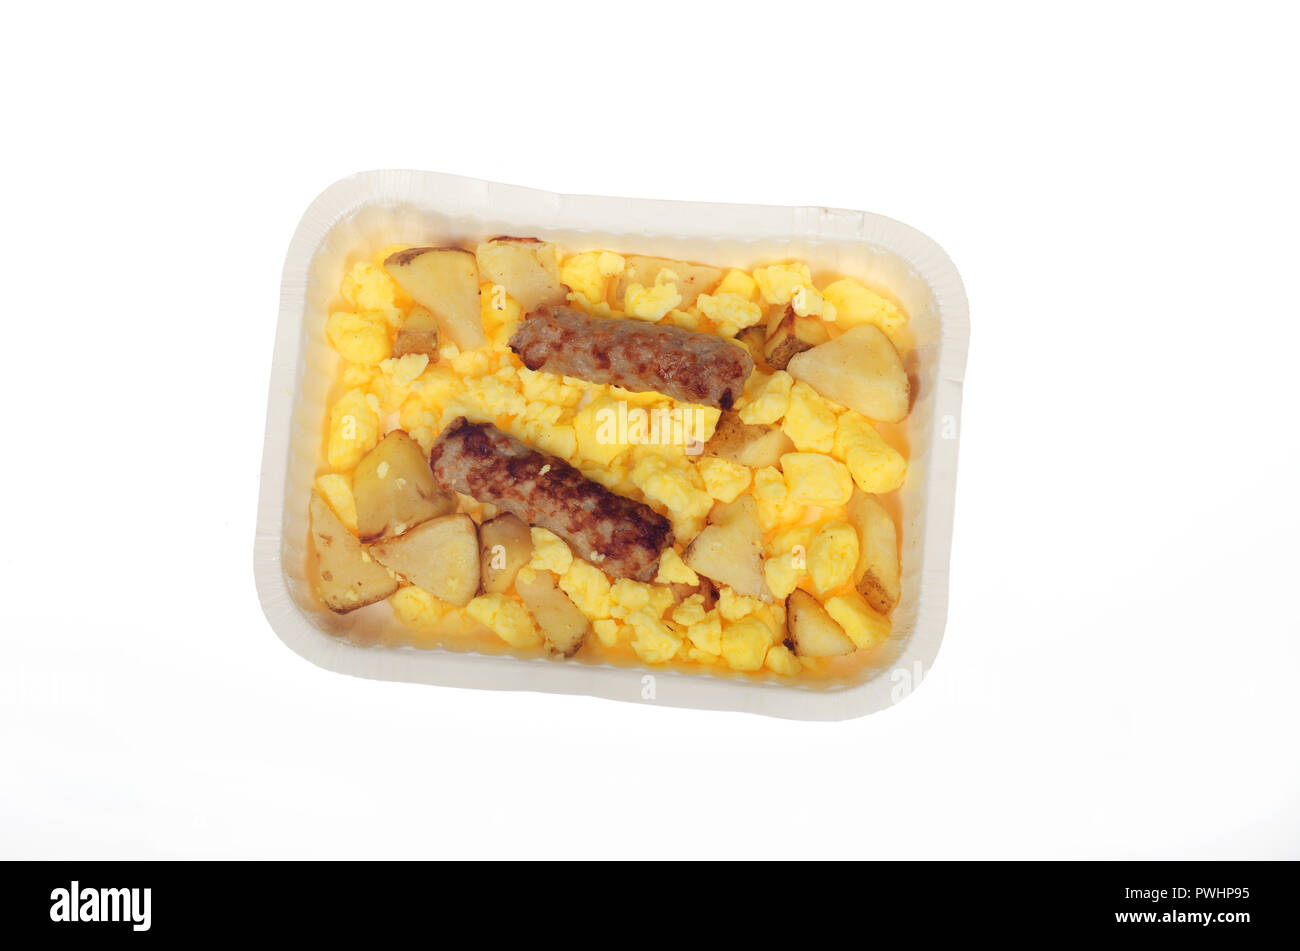 Hot cooked from frozen Aunt Jemima scrambled eggs with roasted potatoes and sausage links in tray on white Stock Photo